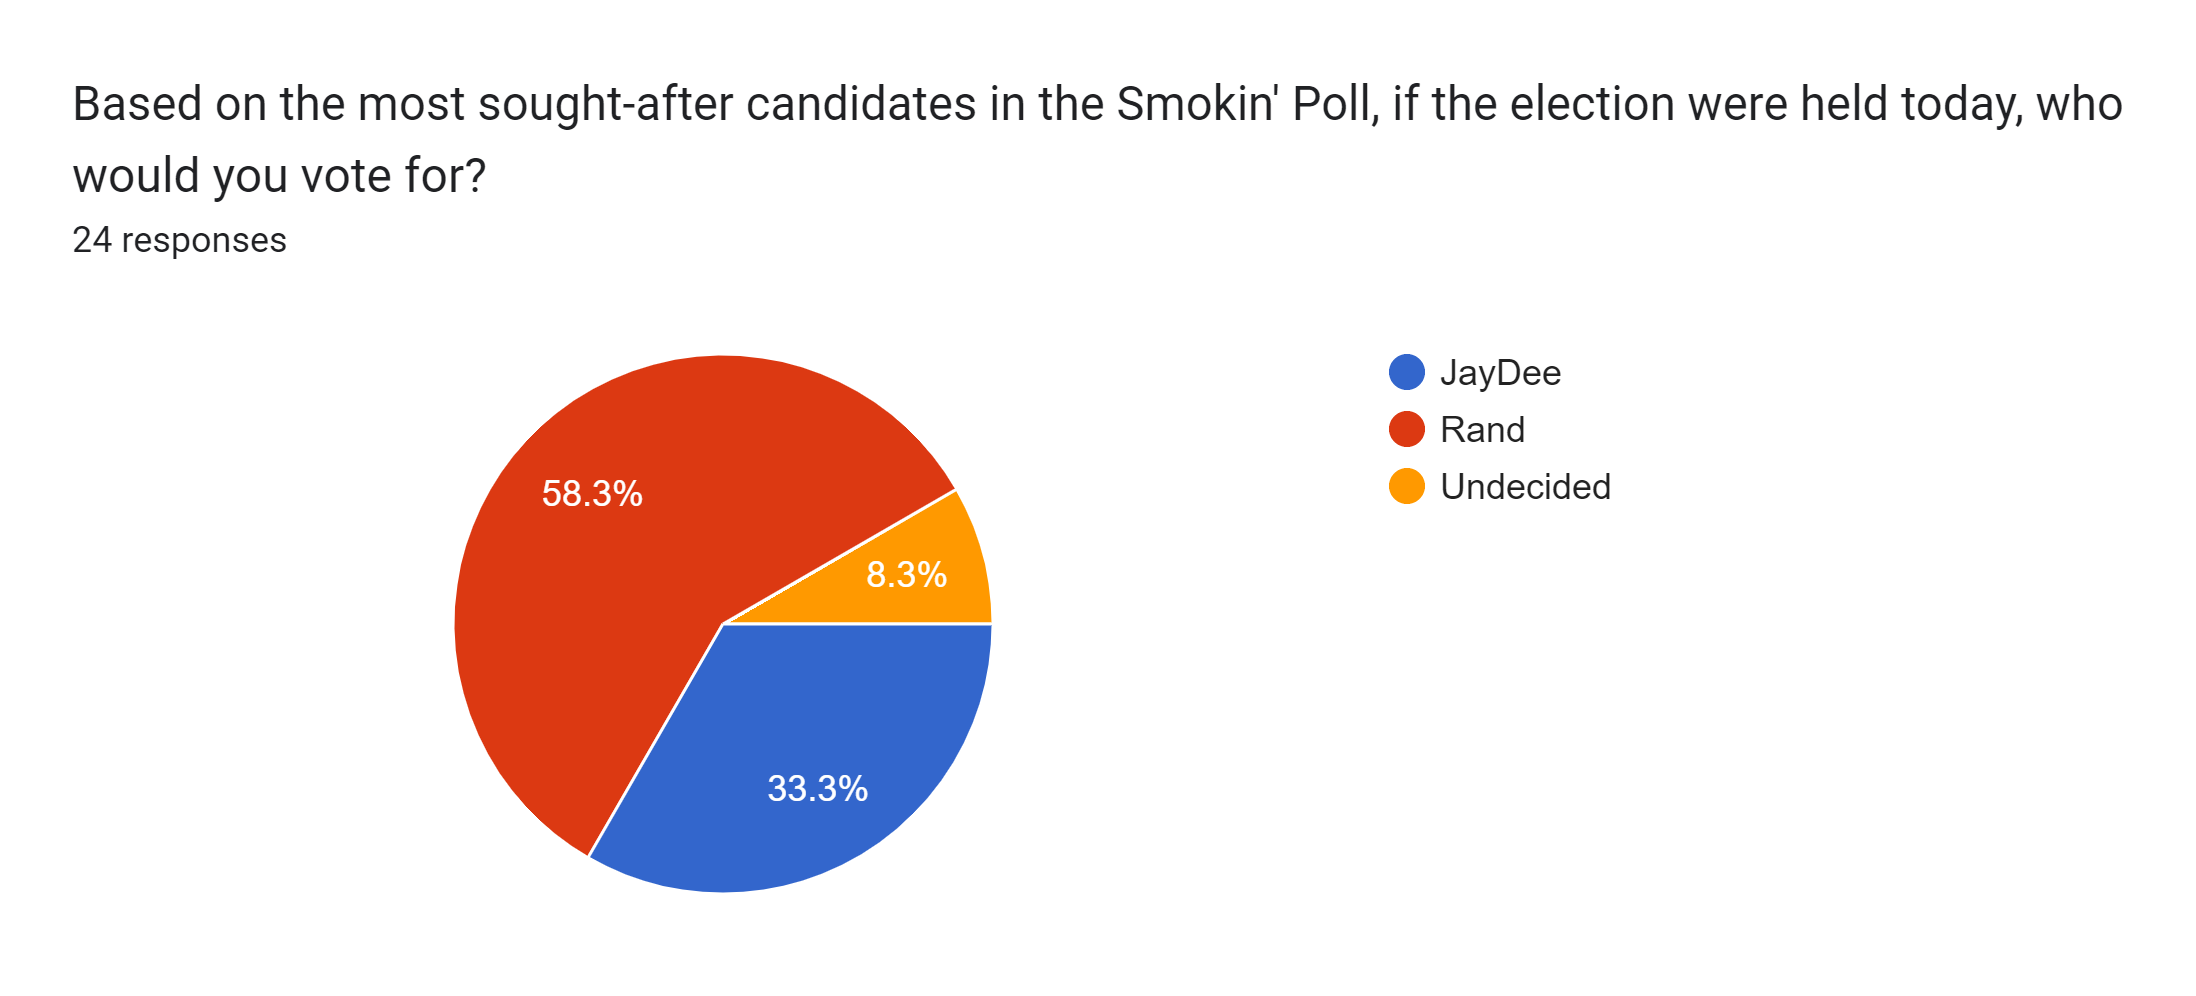 Forms response chart. Question title: Based on the most sought-after candidates in the Smokin' Poll, if the election were held today, who would you vote for?. Number of responses: 24 responses.